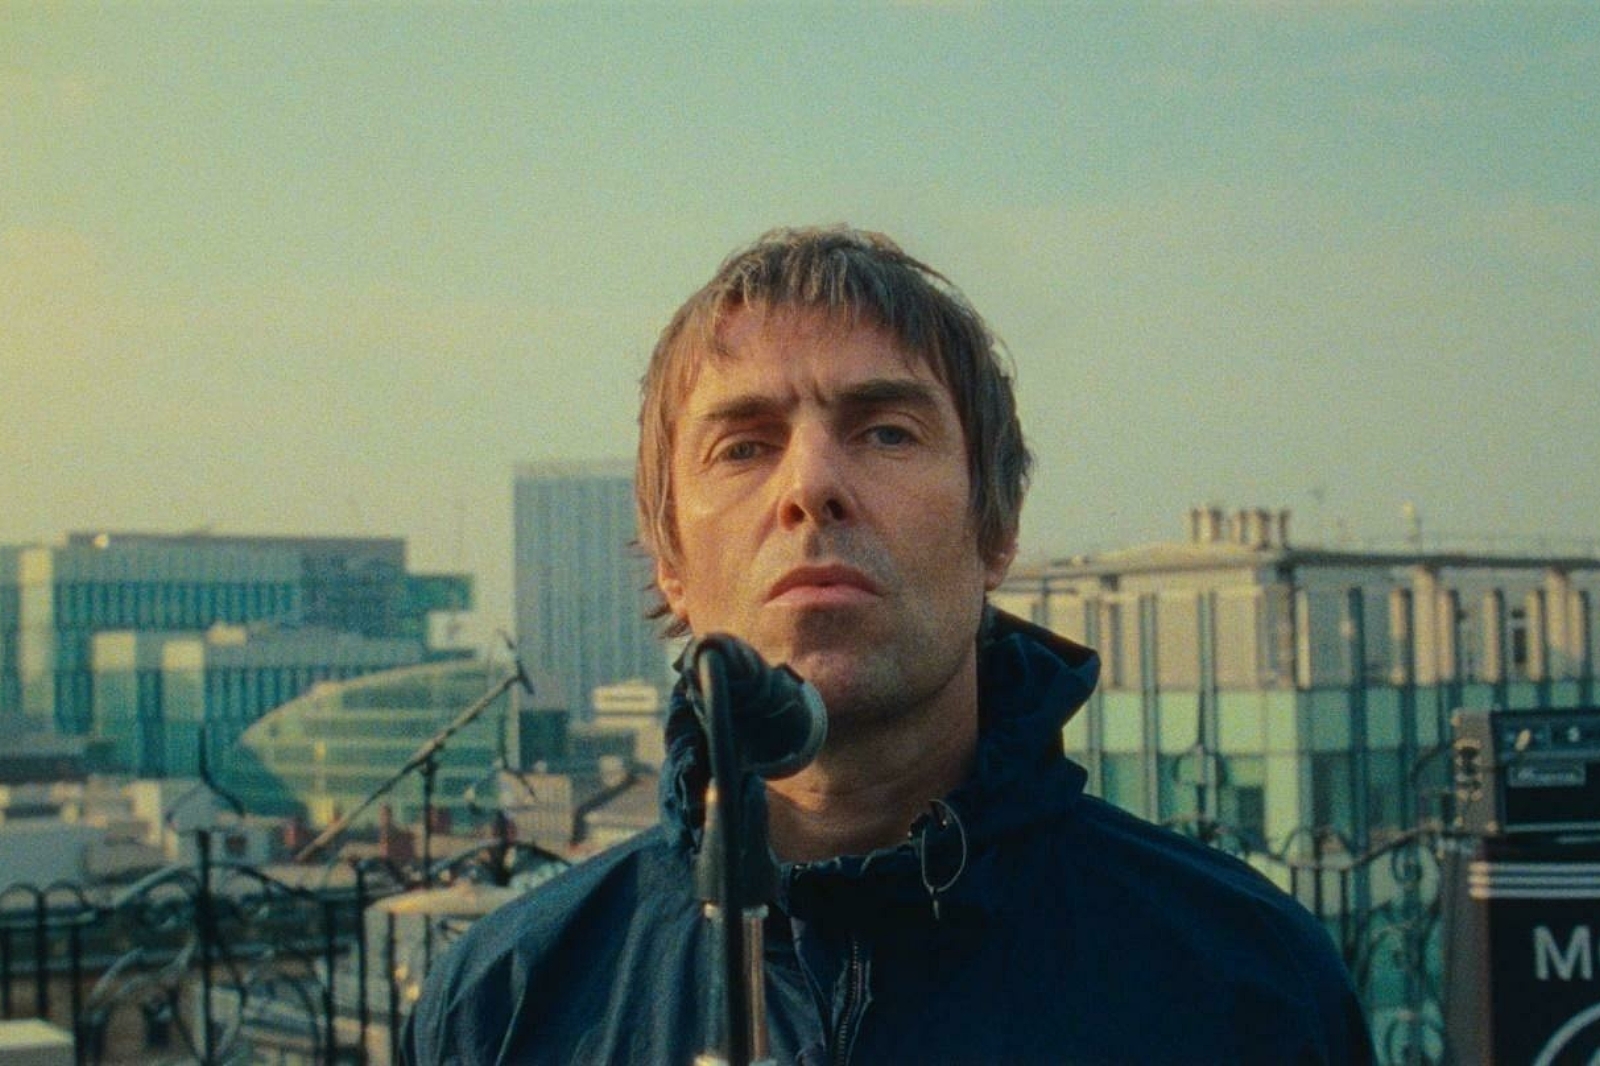 Liam Gallagher releases new track 'Better Days'